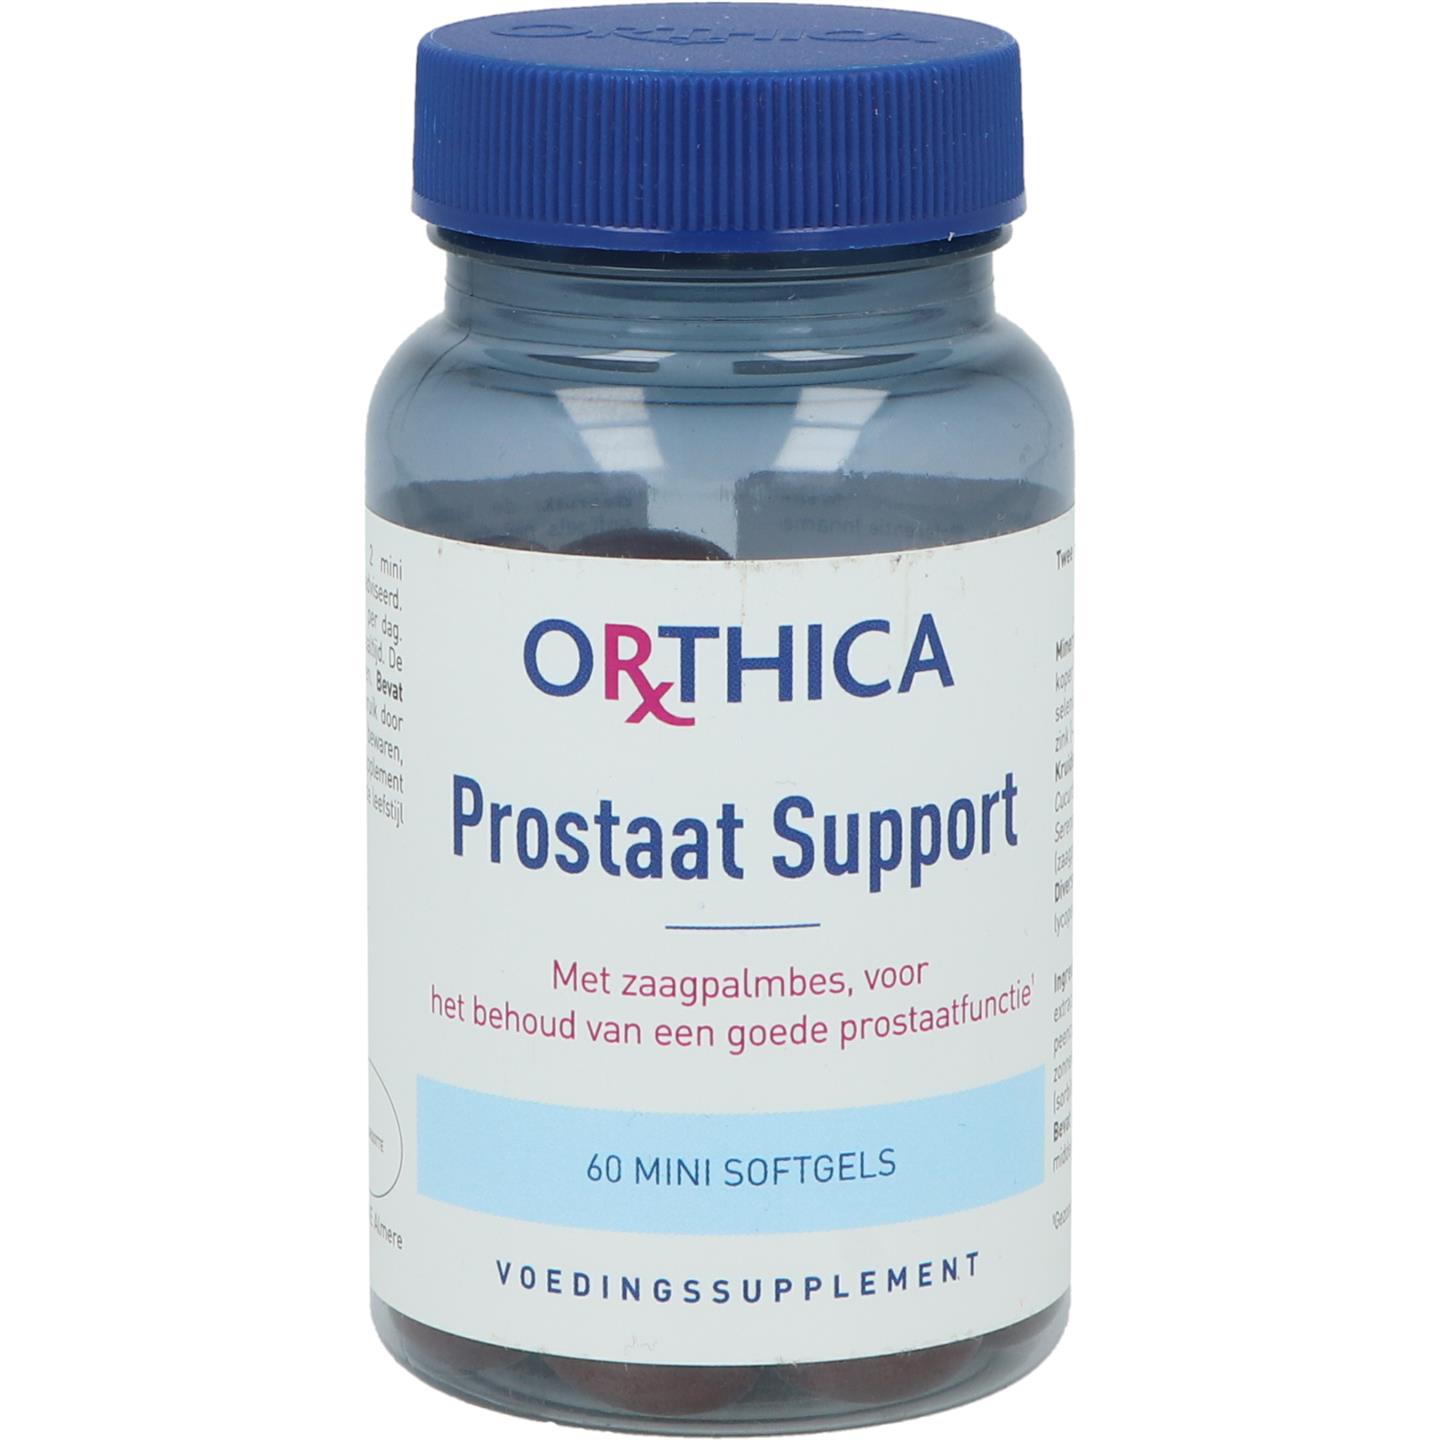 Prostaat Support